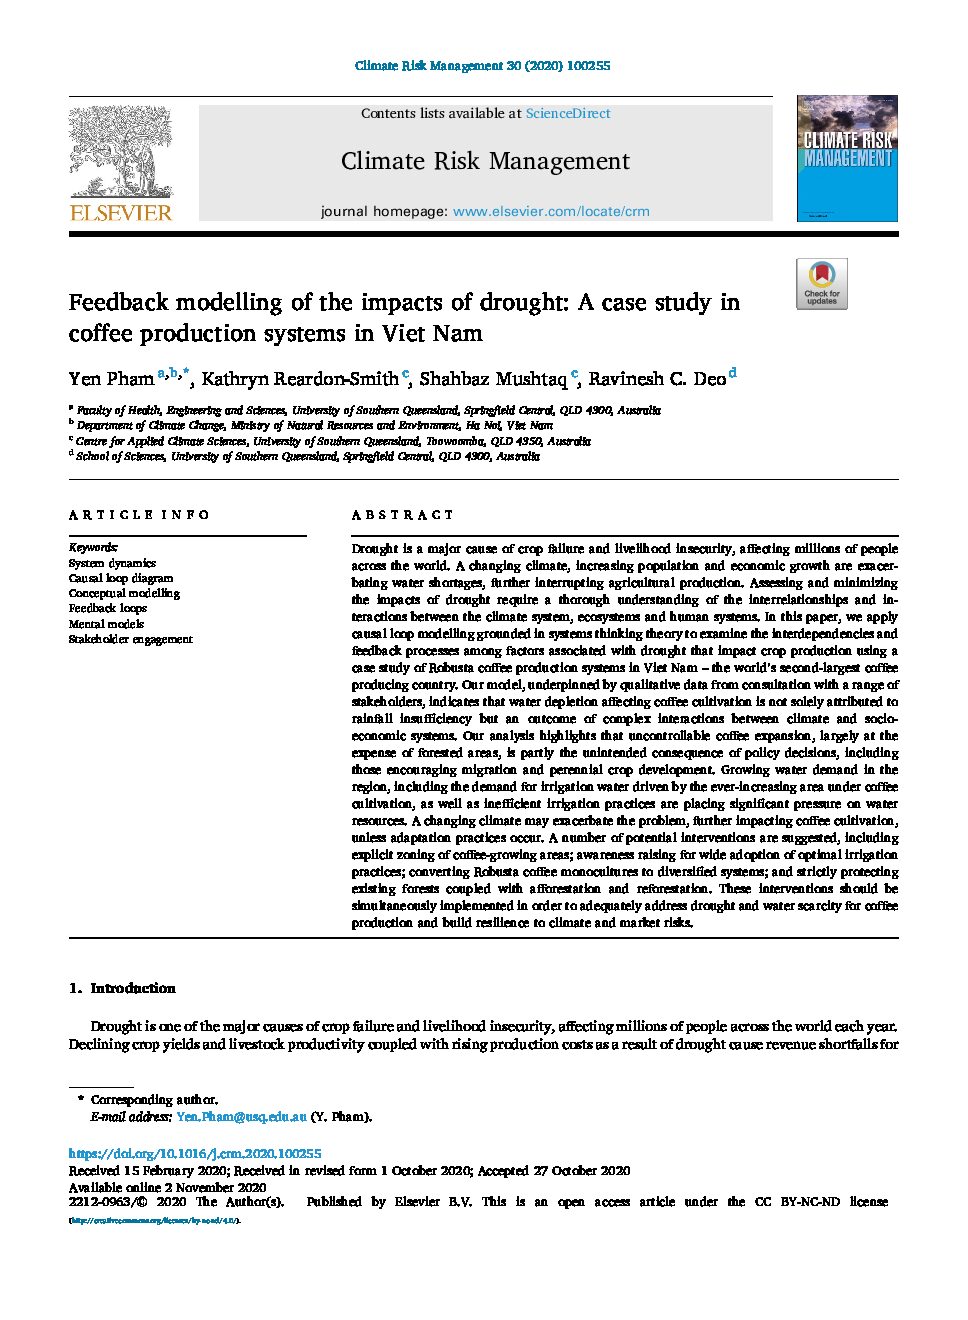 Feedback modelling of the impacts of drought: A case study in coffee production systems in Viet Nam